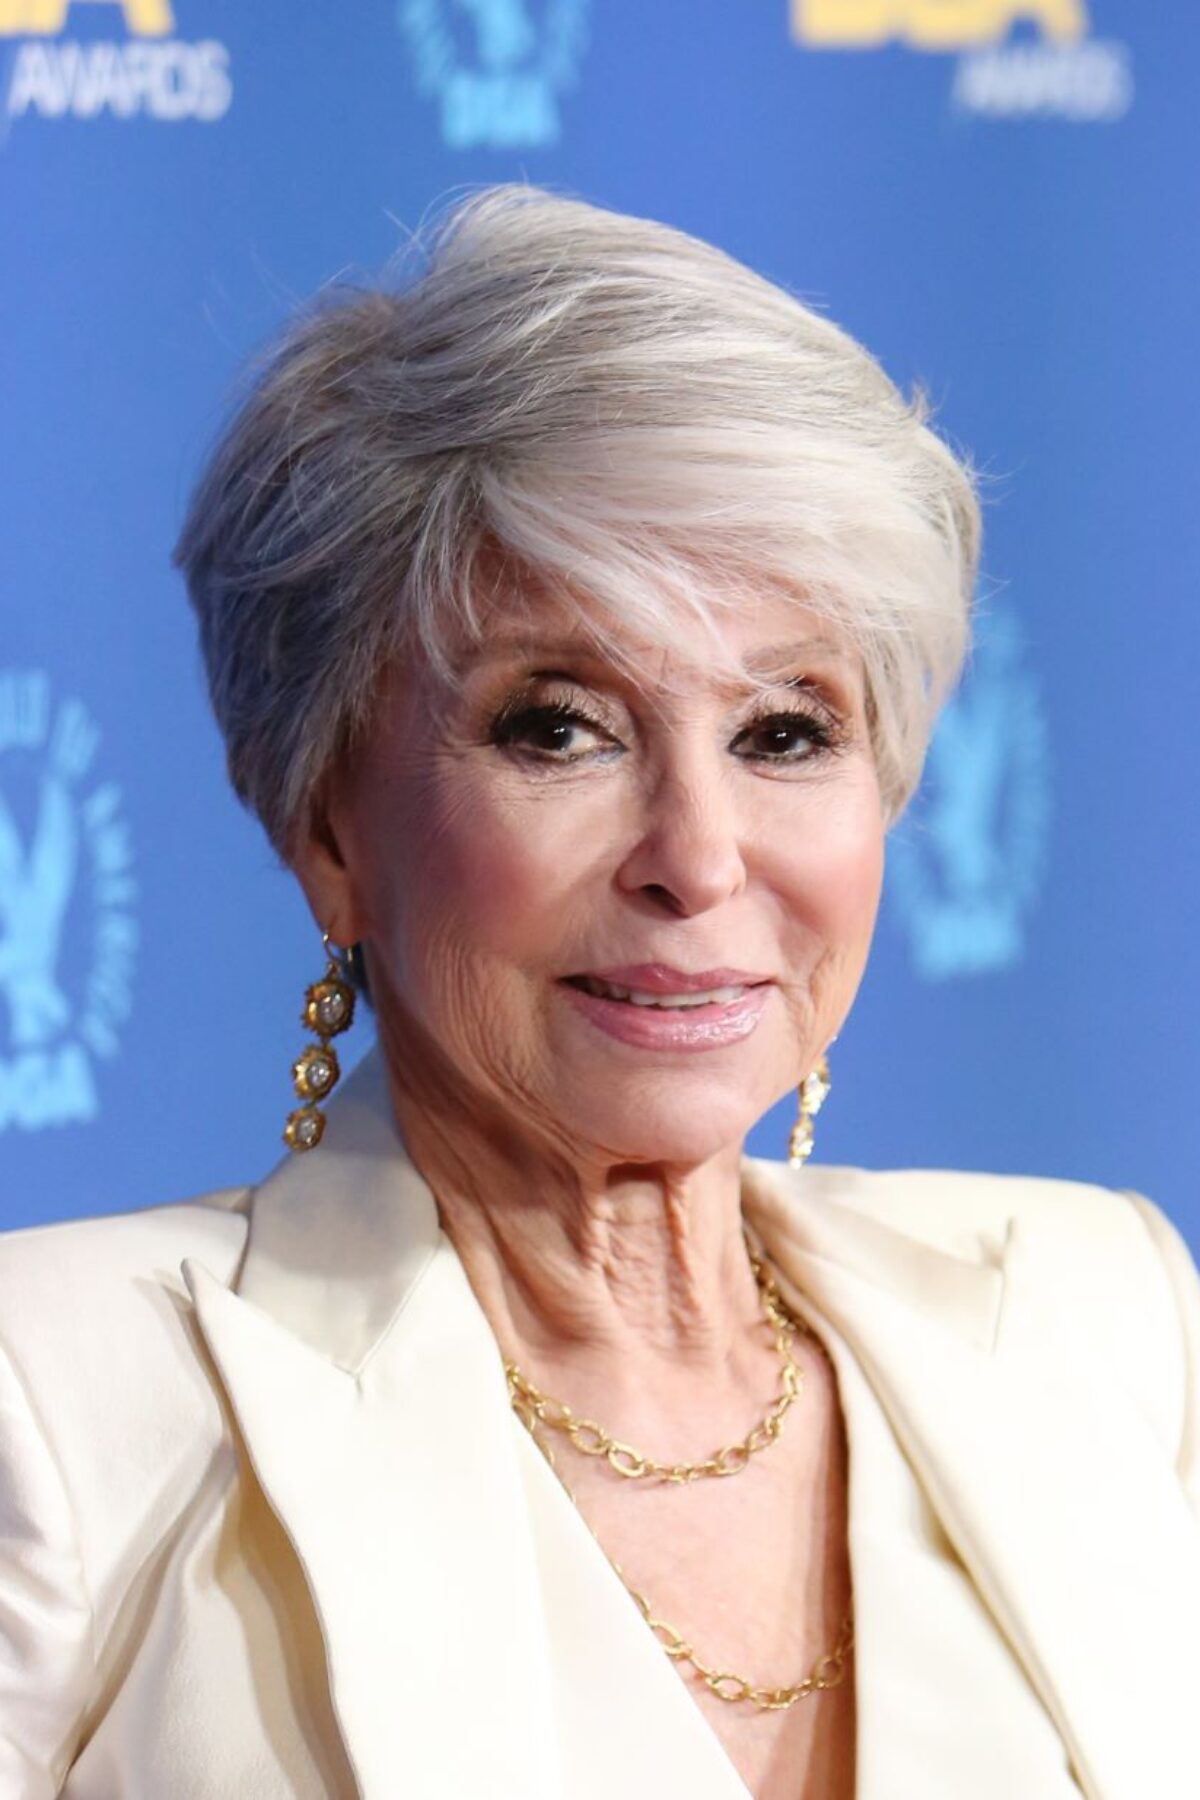 BEVERLY HILLS, CALIFORNIA - MARCH 12: Rita Moreno attends the 74th Annual Directors Guild Of America Awards at The Beverly Hilton on March 12, 2022 in Beverly Hills, California. (Photo by Jesse Grant/Getty Images)